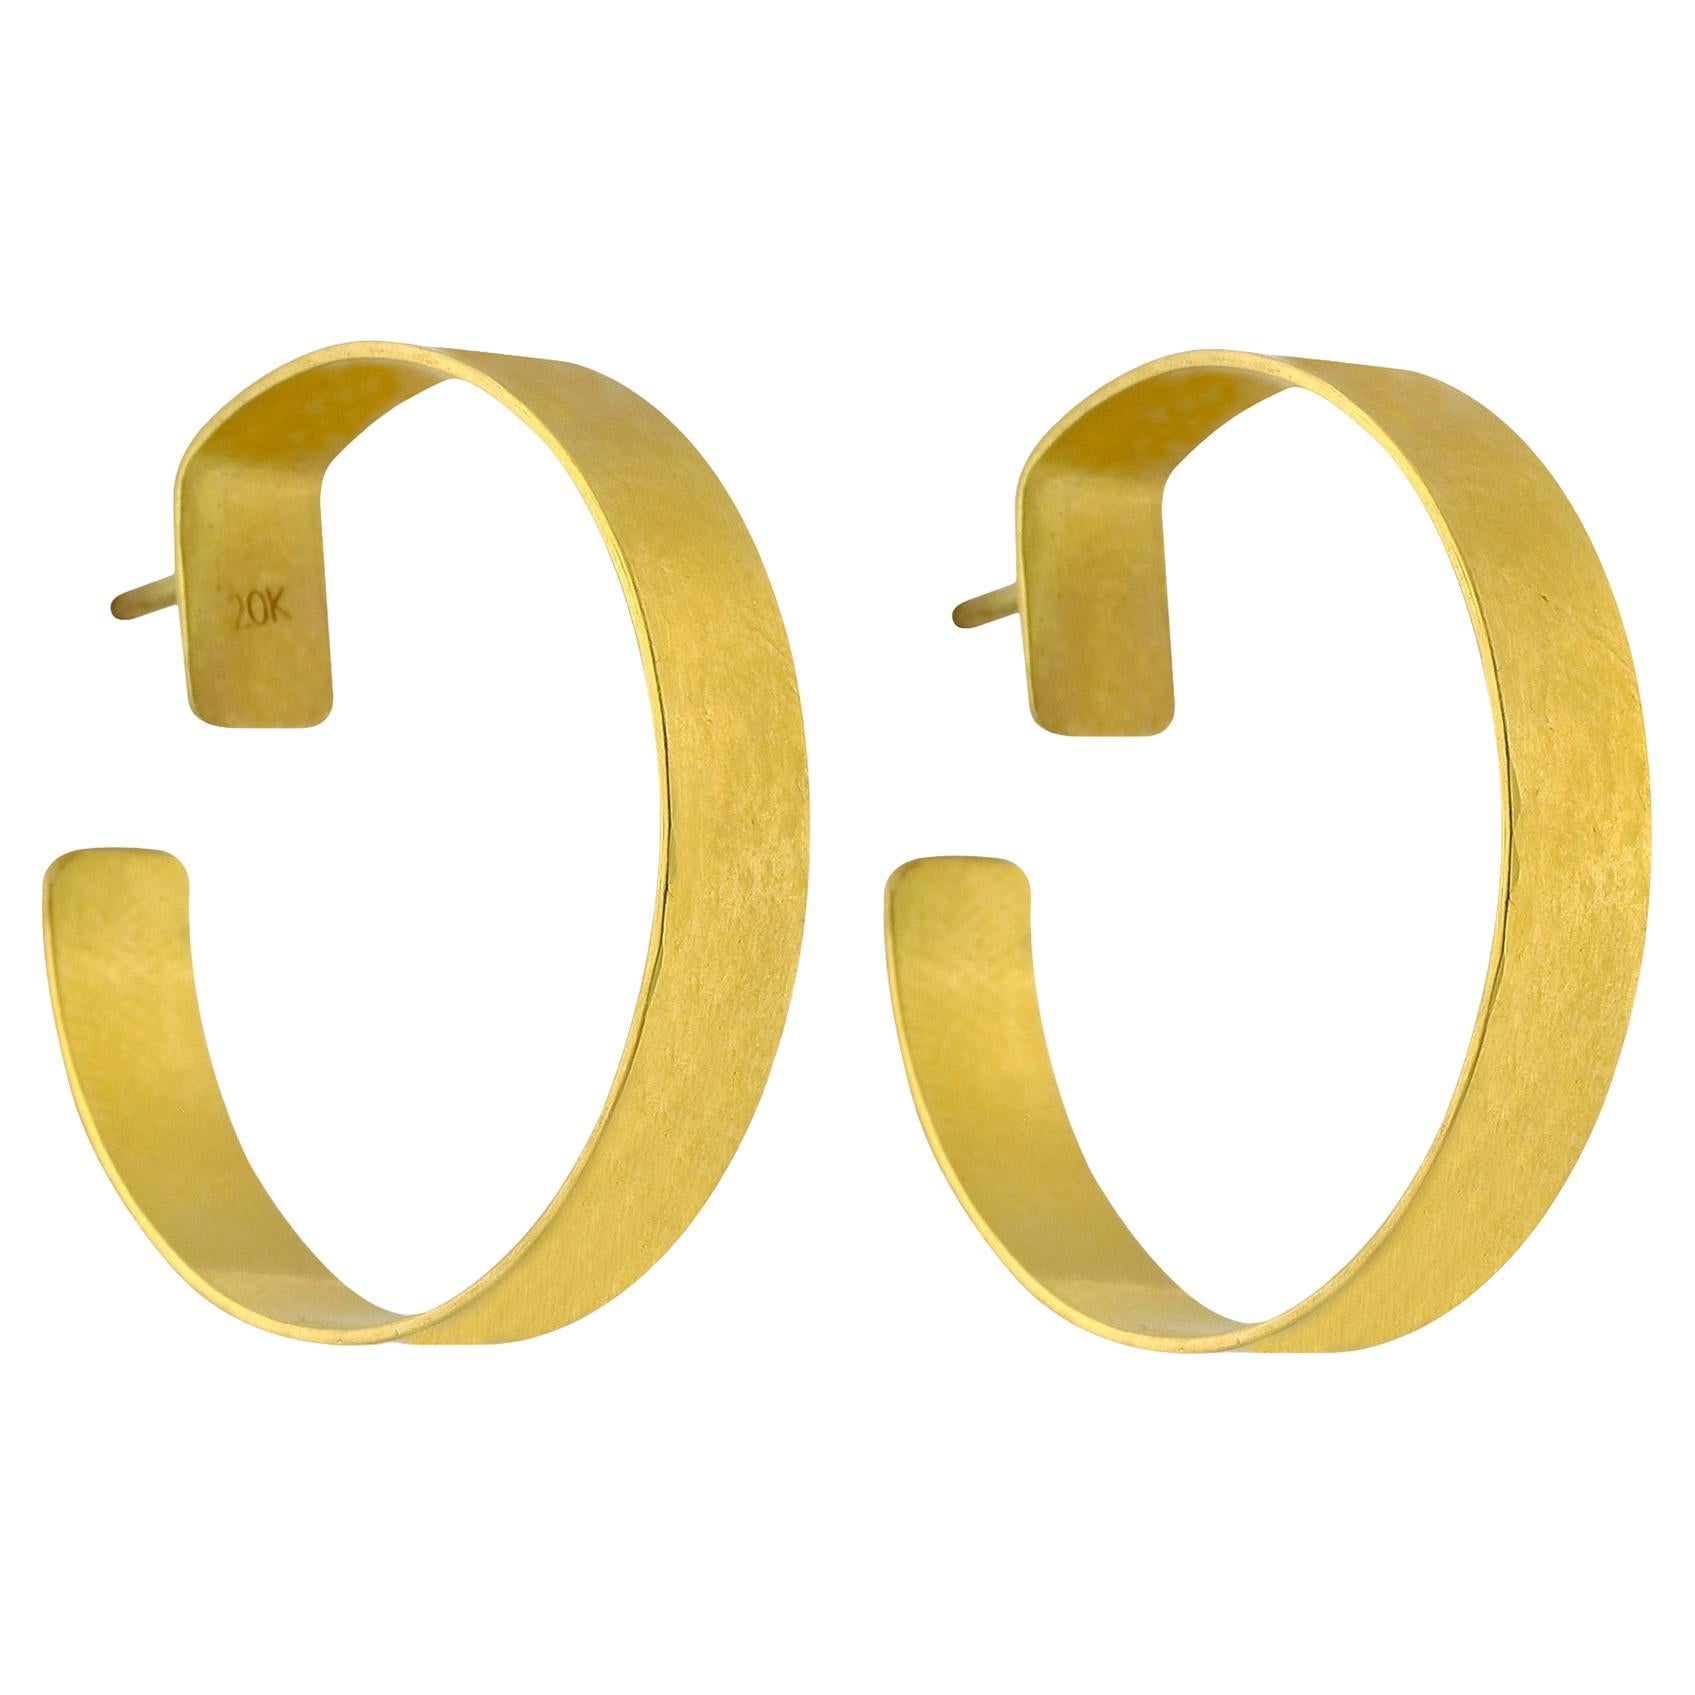 PHILIPPE SPENCER Solid 20K Gold 1" Inch Hand-Forged & Hammered Hoop Earrings For Sale